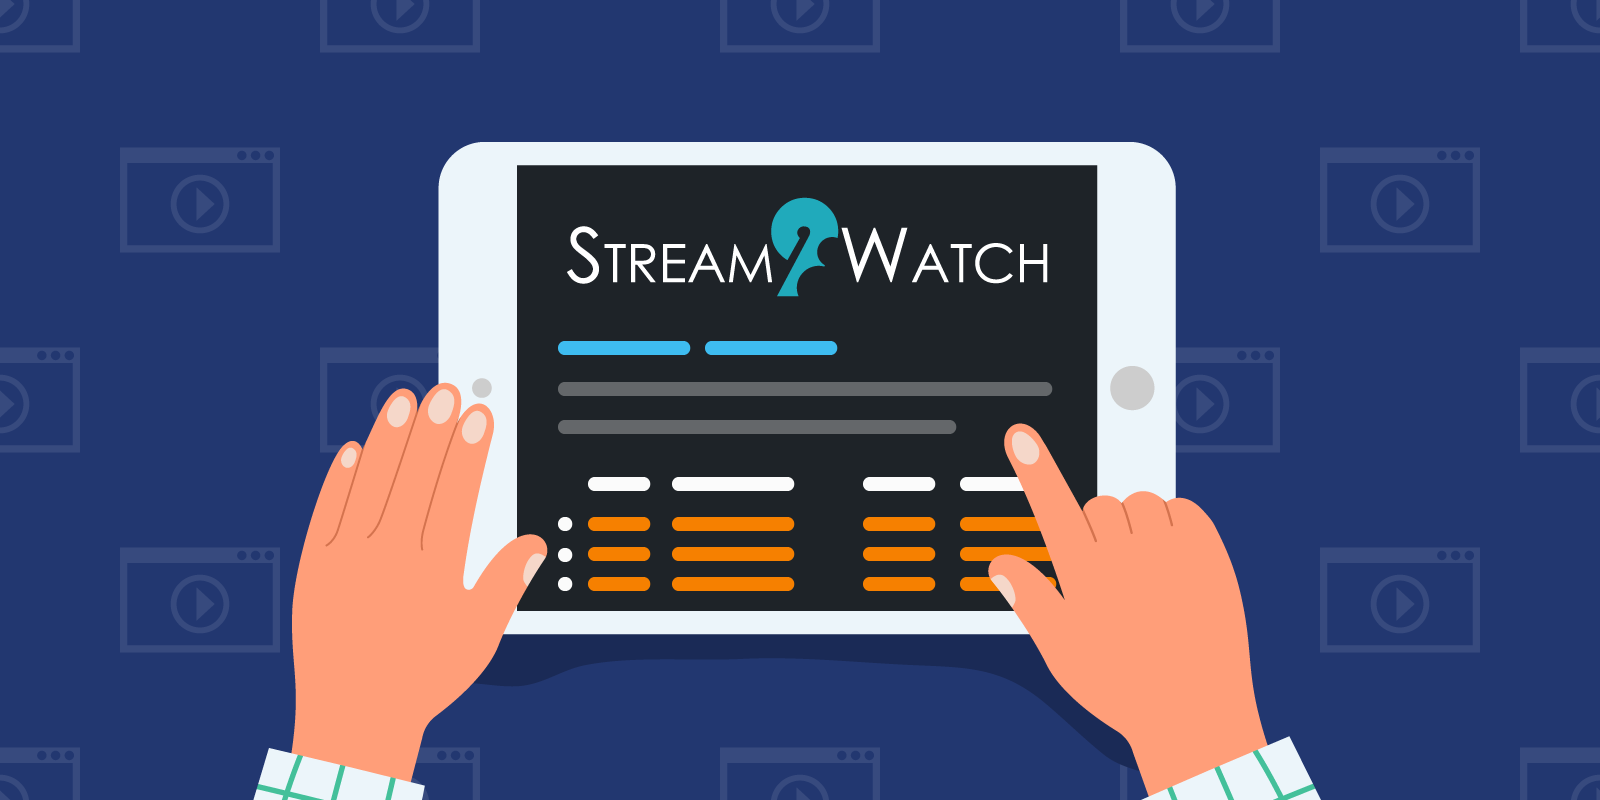 How to access Stream2Watch safely